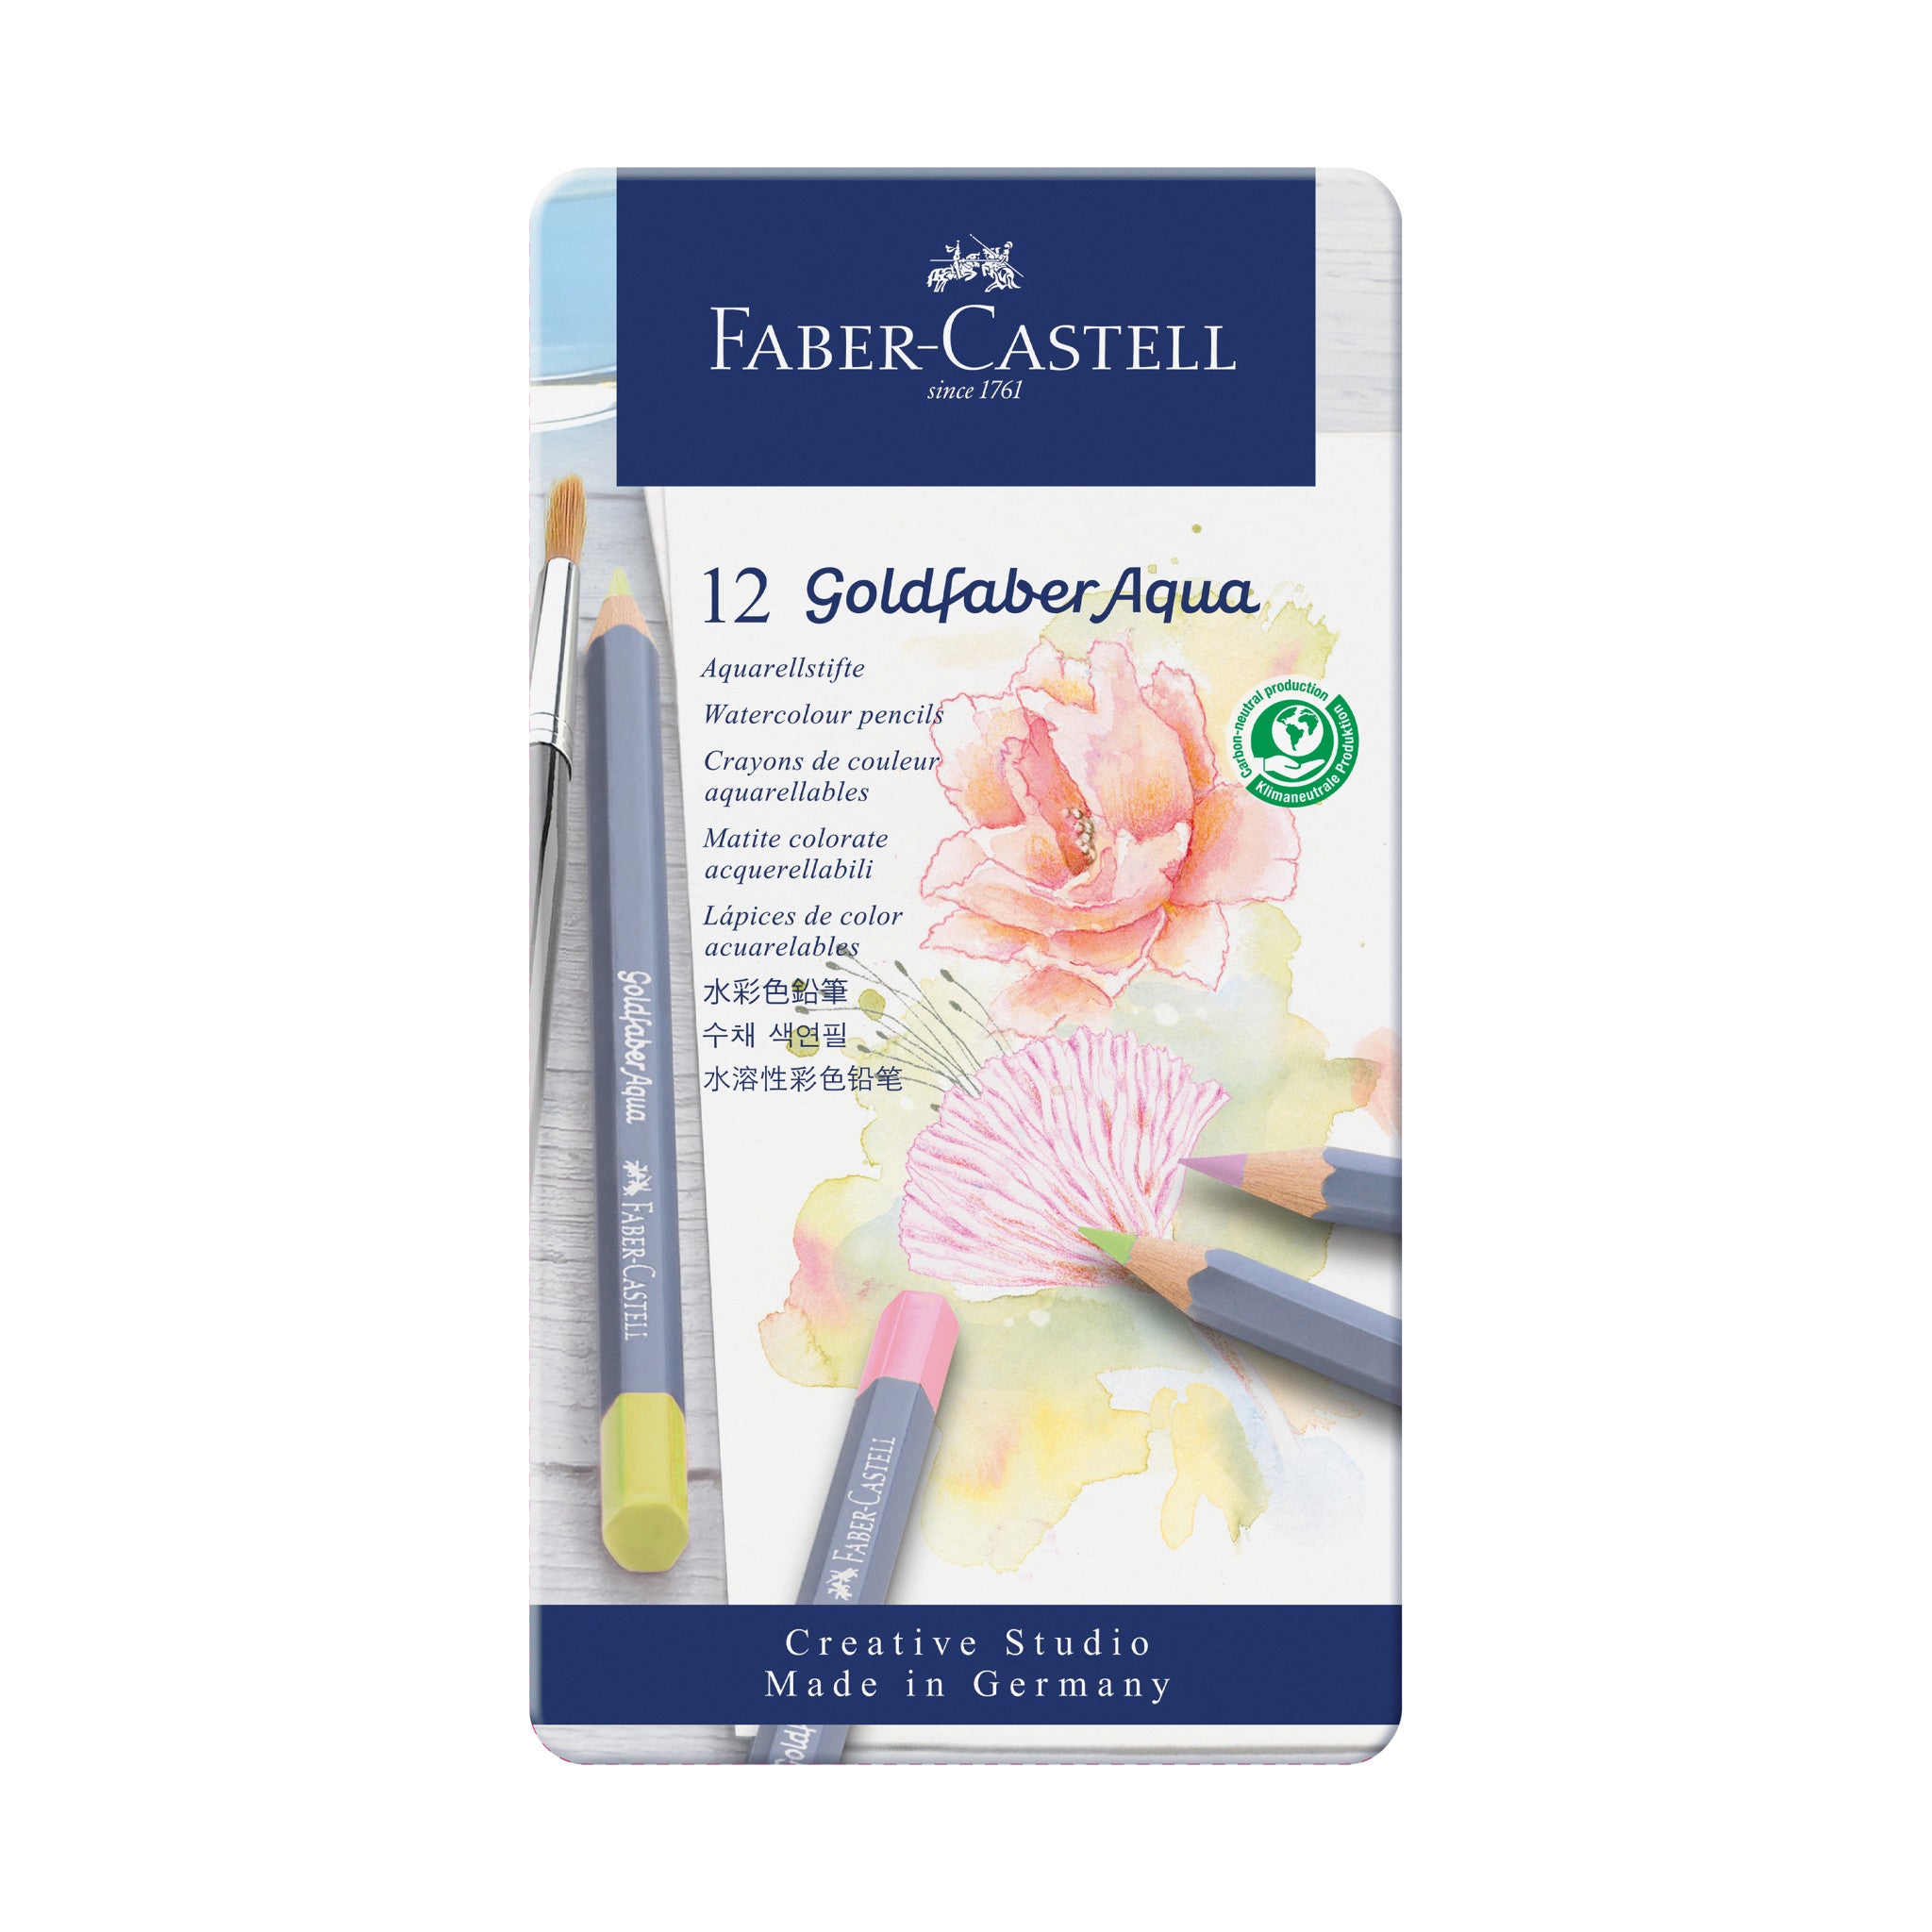 Faber-Castell Grip Watercolor EcoPencils - 12 Water Color Pencils with Brush